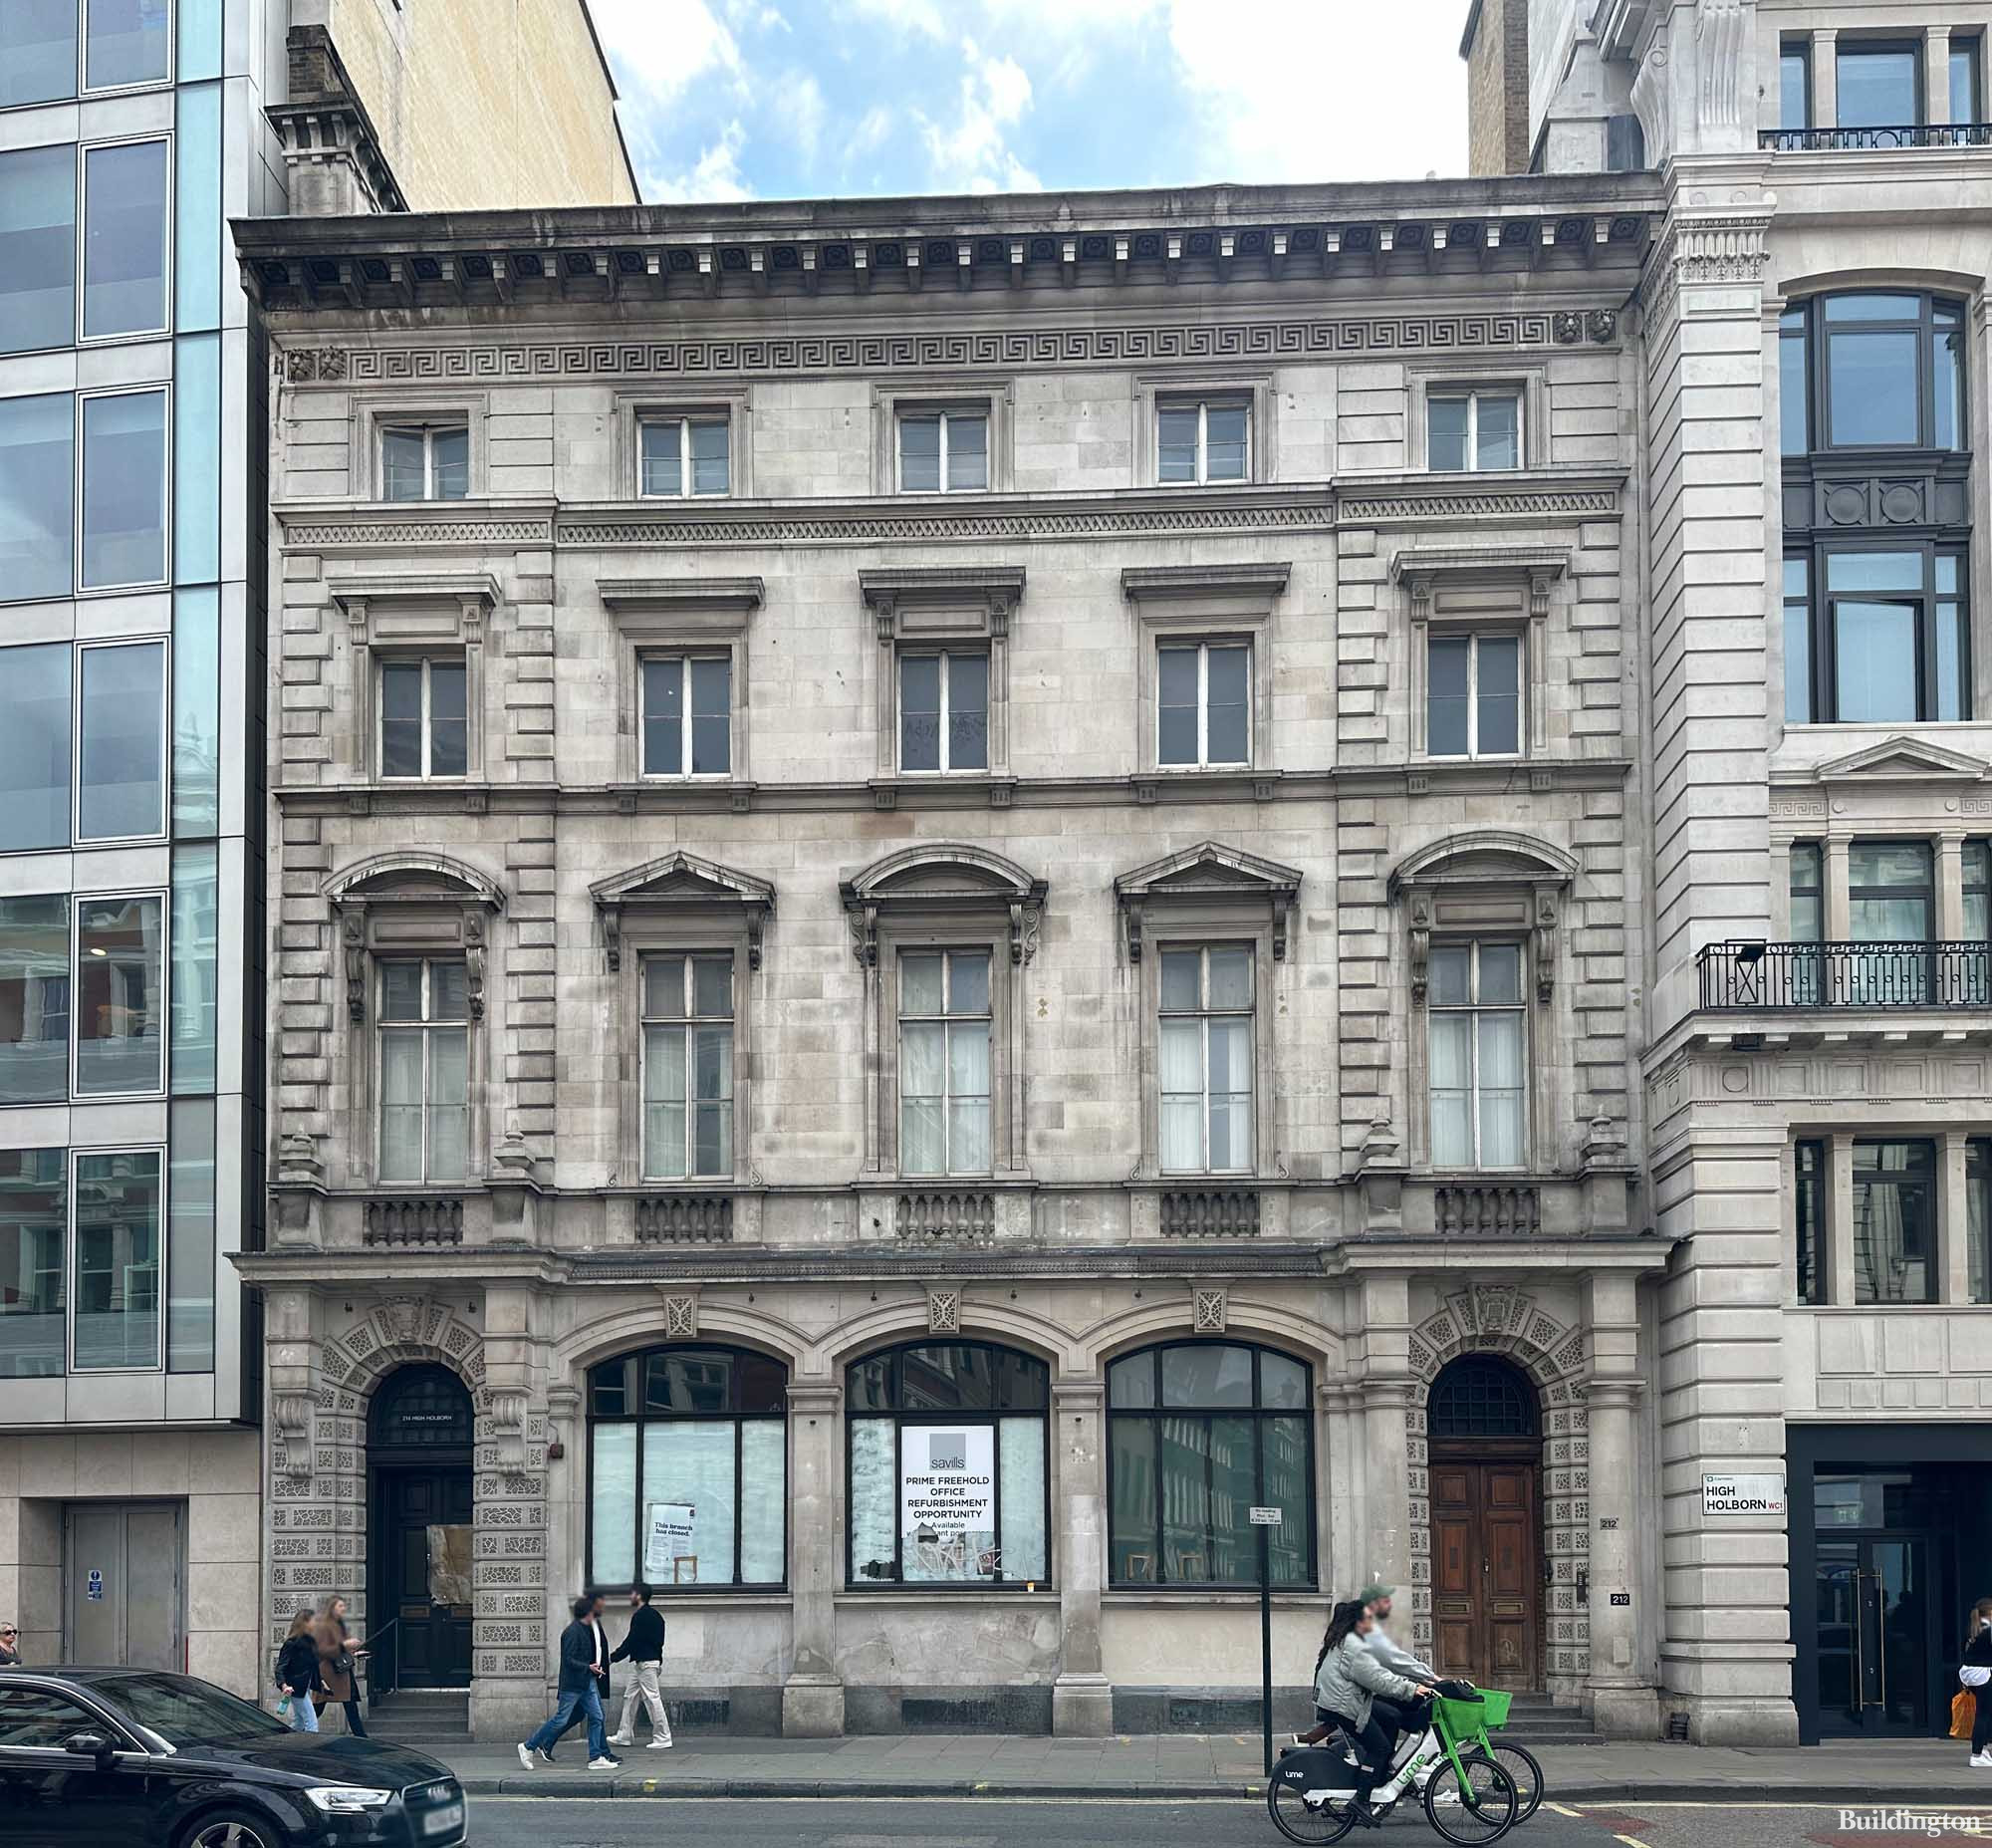 212-214 High Holborn - prime freehold office refurbishment opportunity was available through Savills.